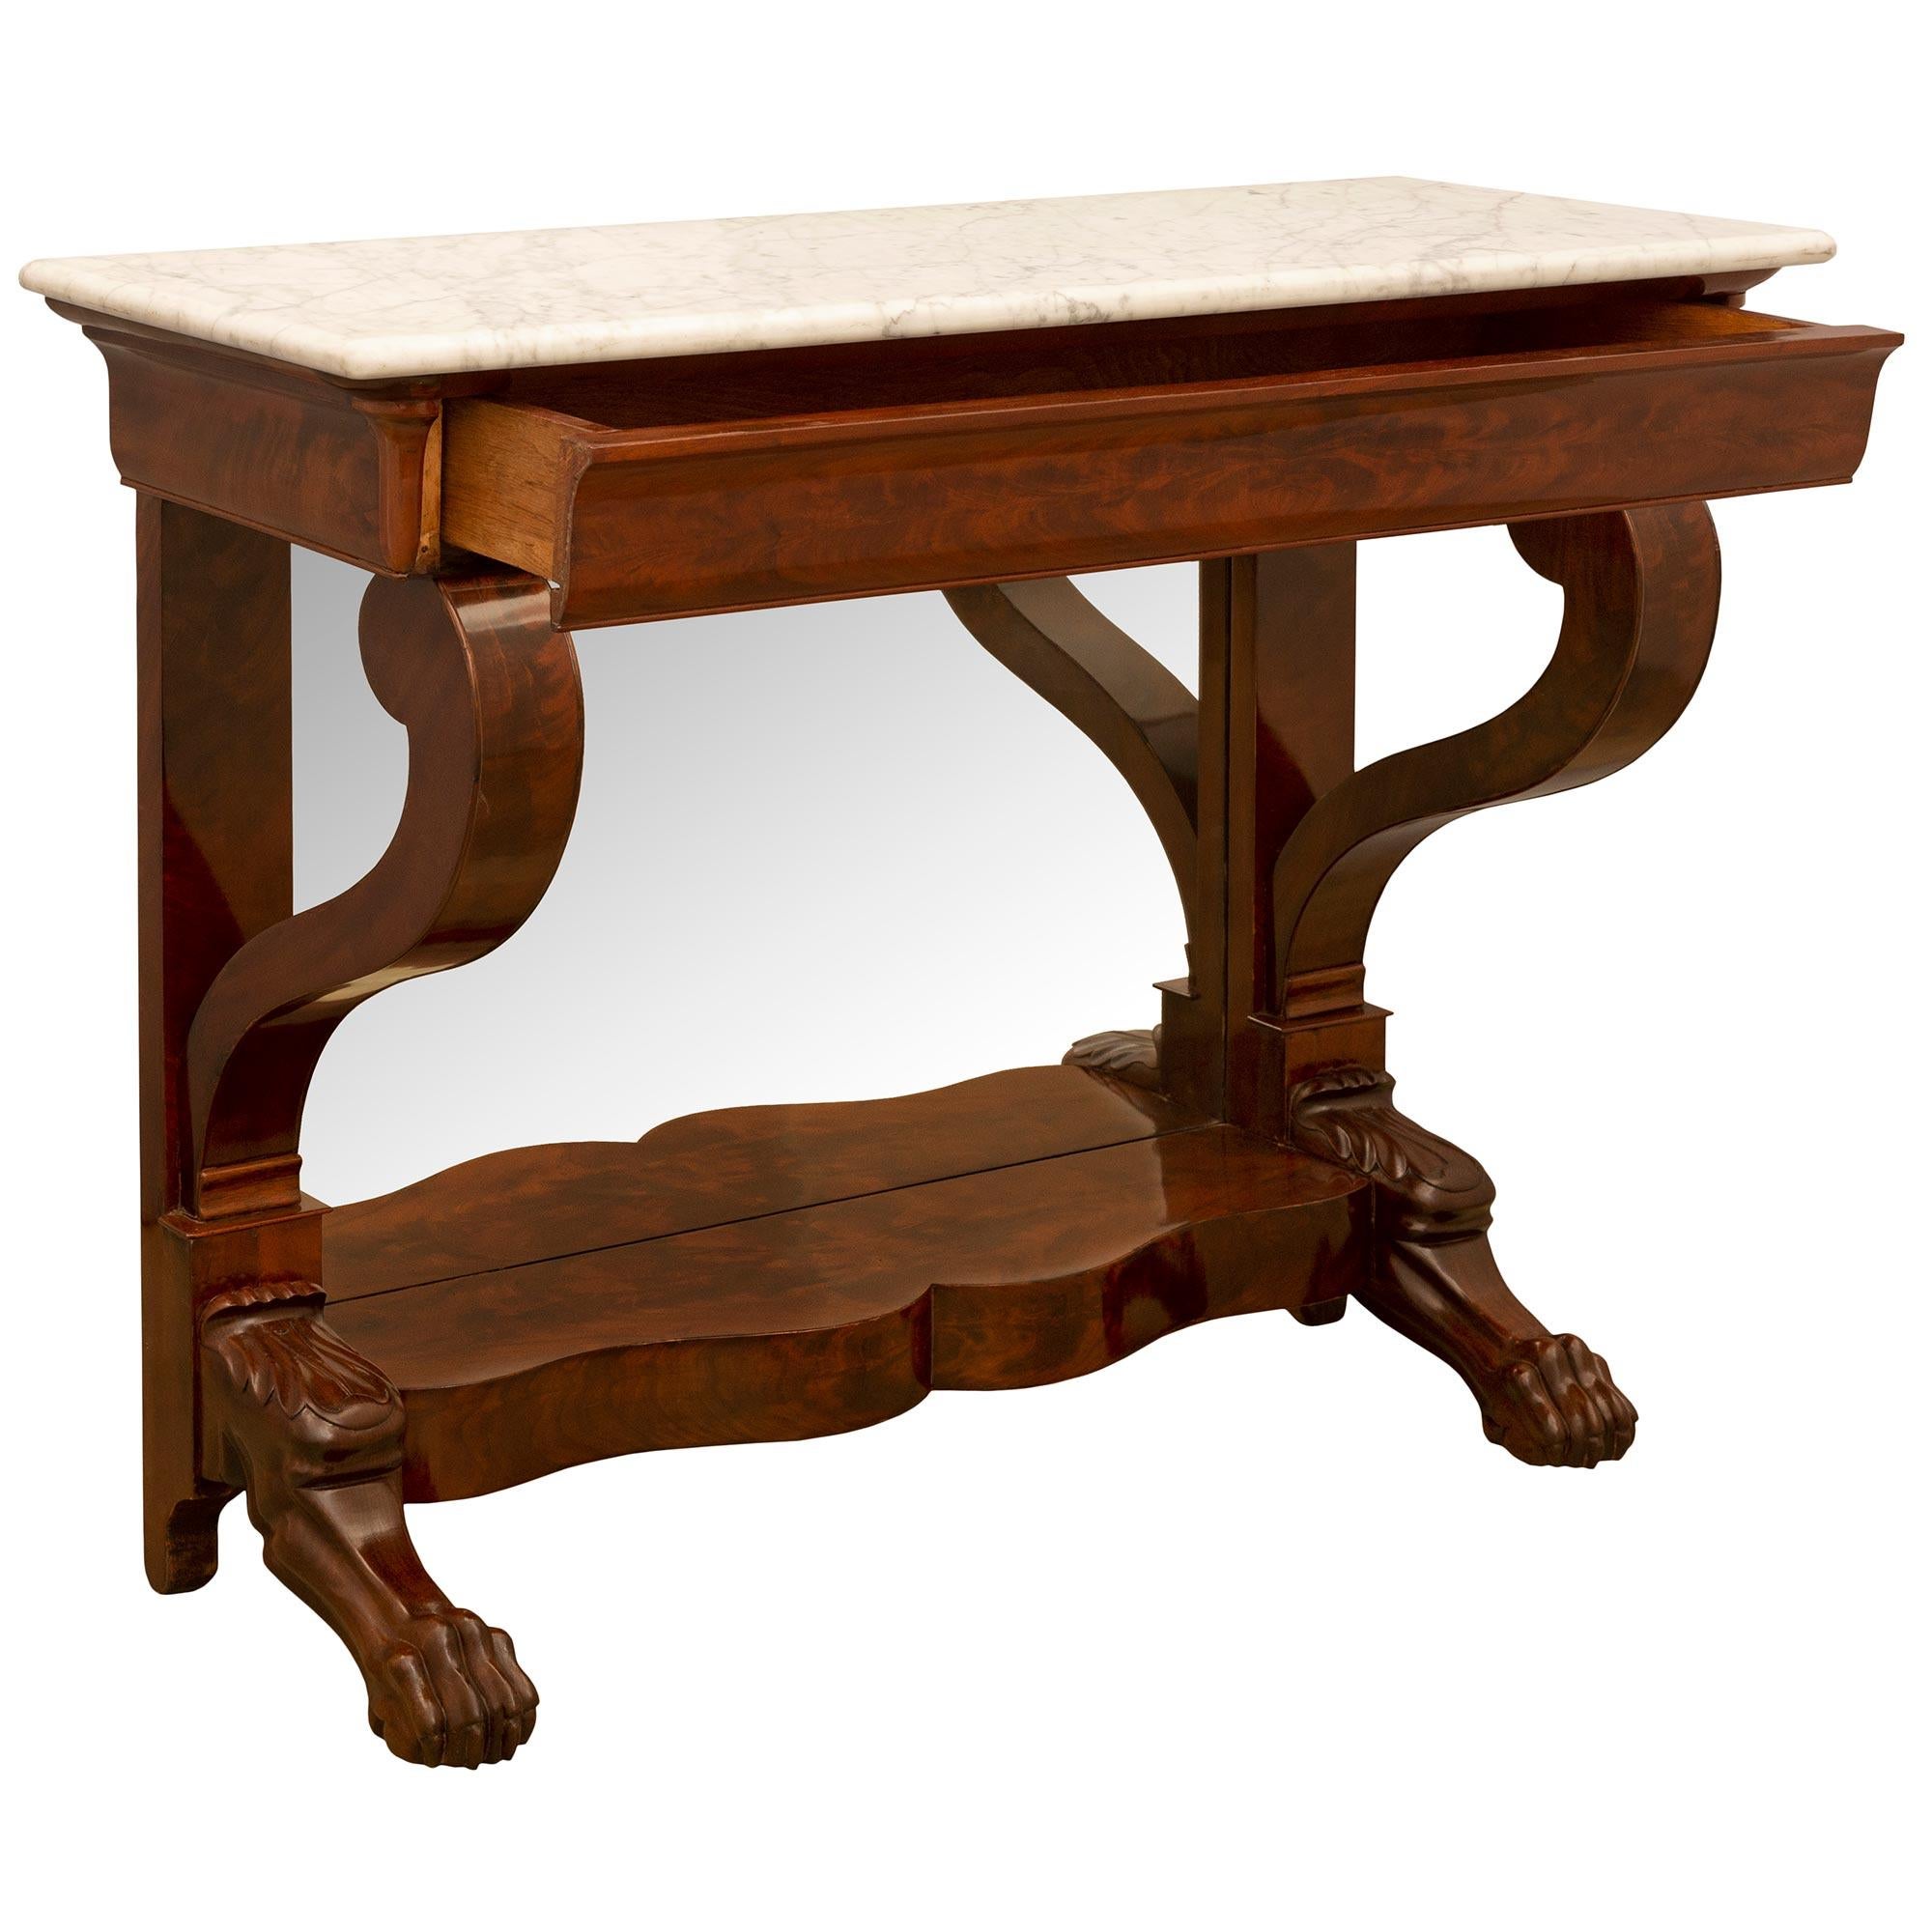 French 19th Century Empire Style Mahogany and Satinwood Inlaid Console In Good Condition For Sale In West Palm Beach, FL